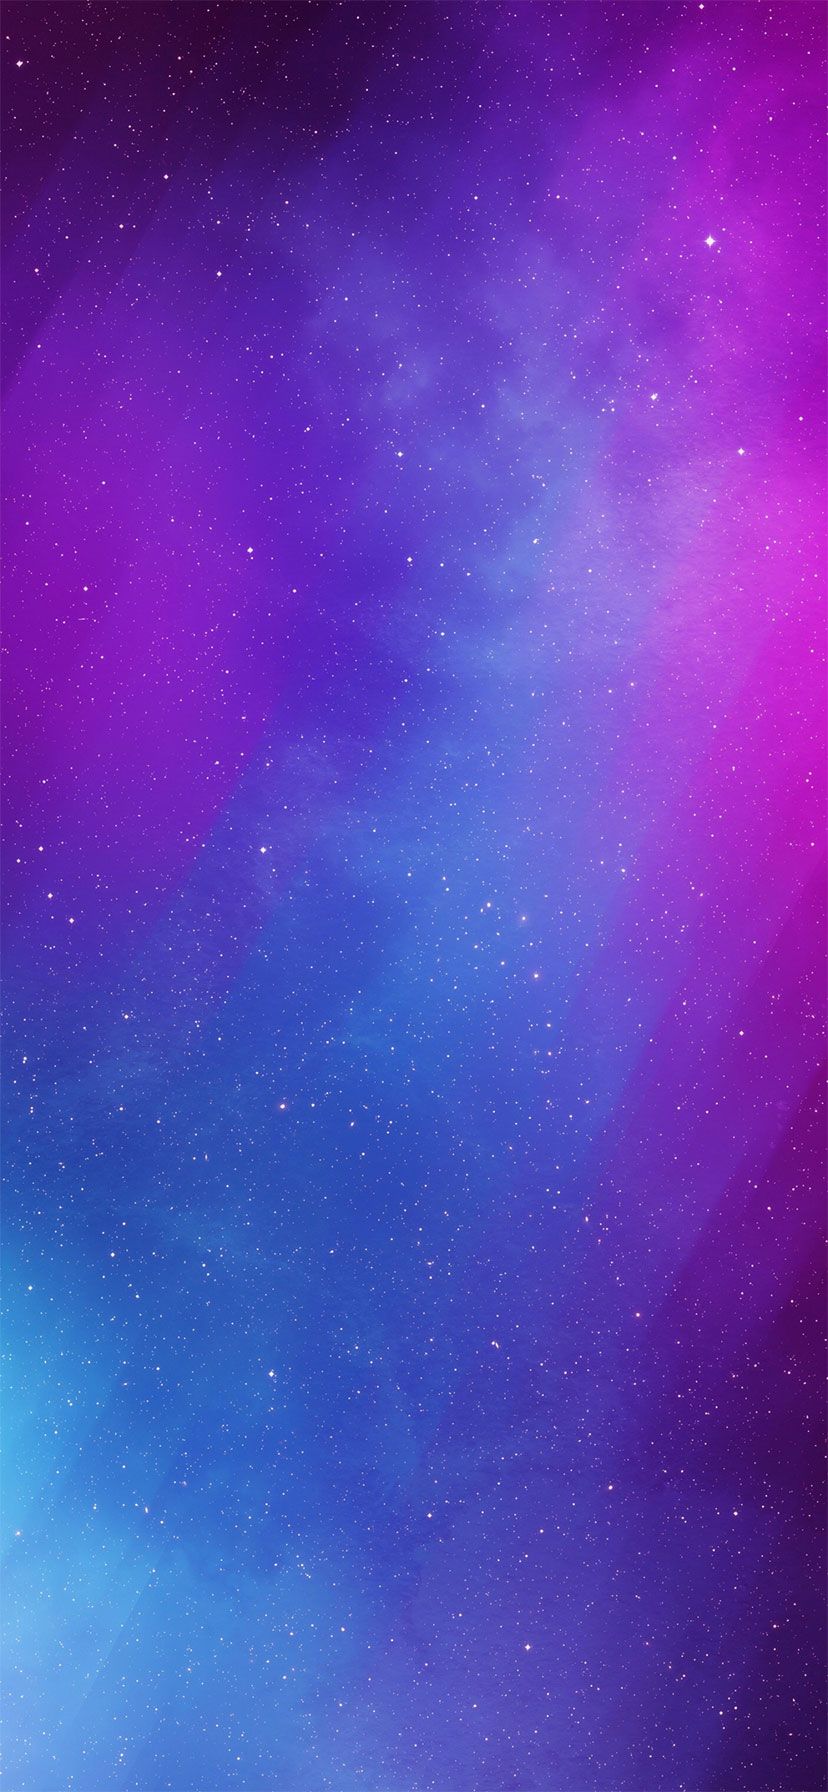 Latest High Quality iPhone 11 Wallpaper & Background for Everyone